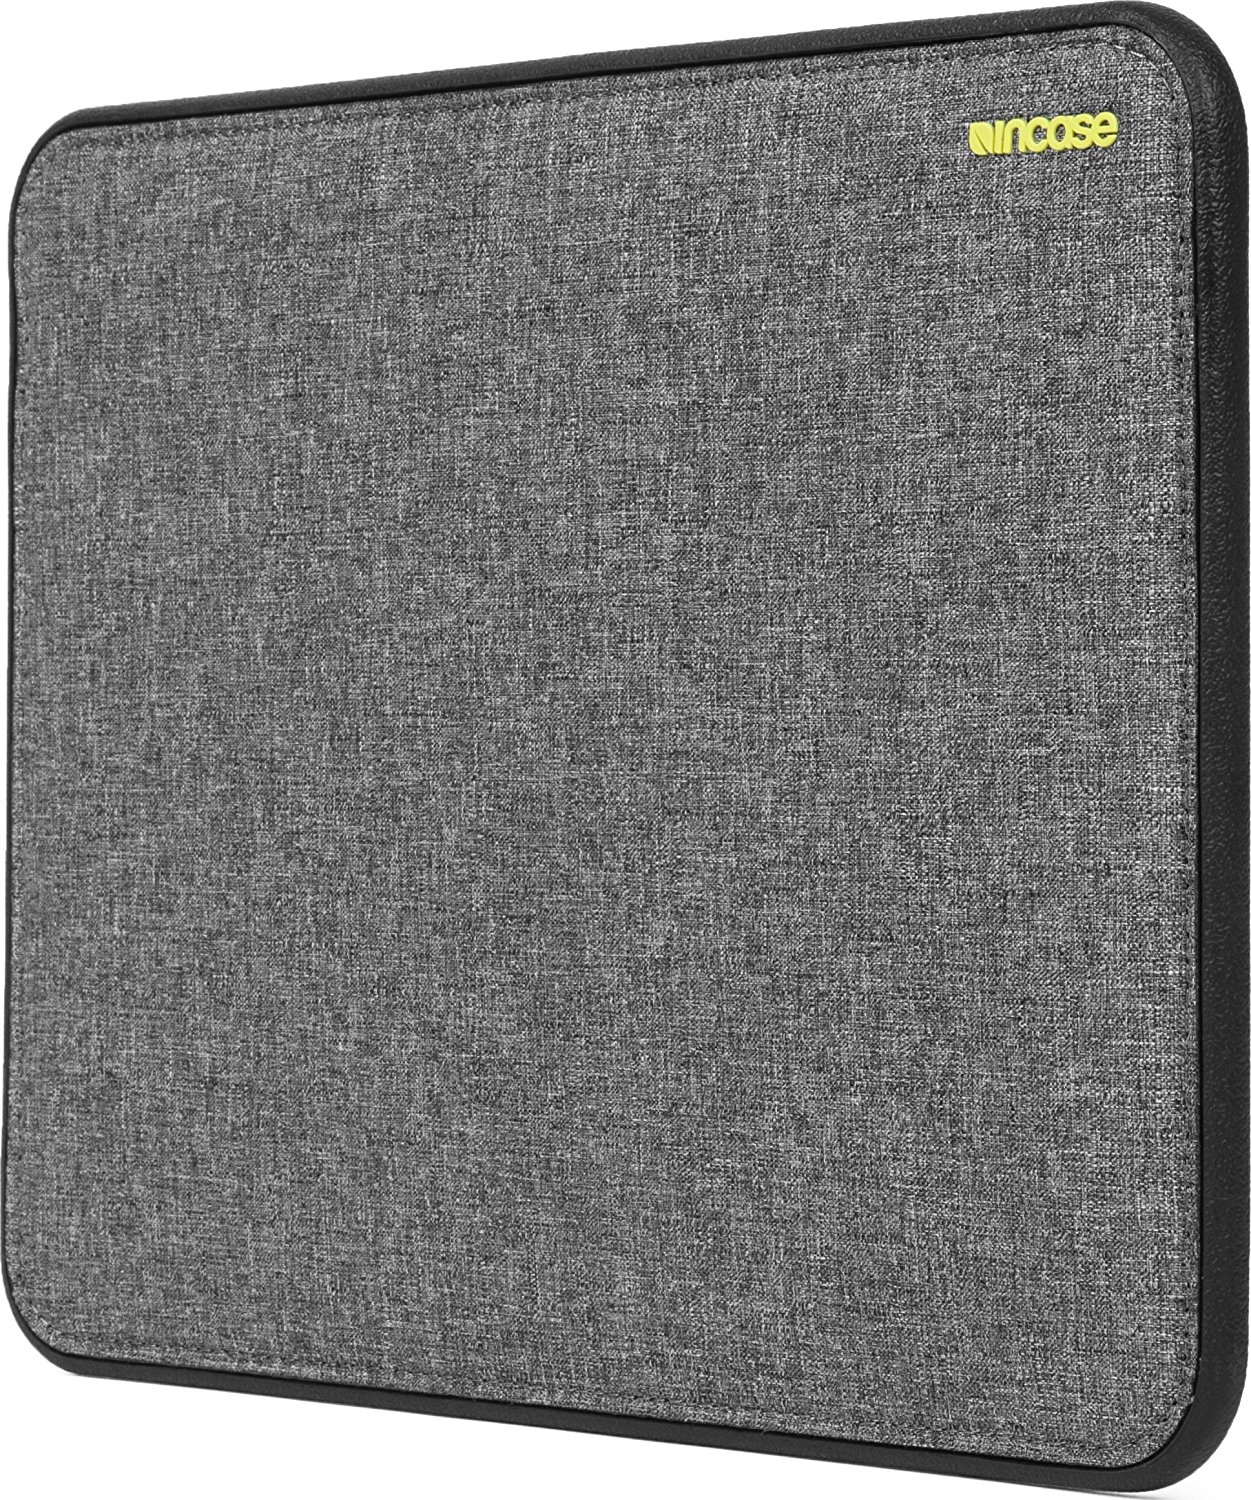 Incase ICON Sleeve with TENSAERLITE for 13 Inch MacBook Air - Heather Gray/Black - (Open Box)